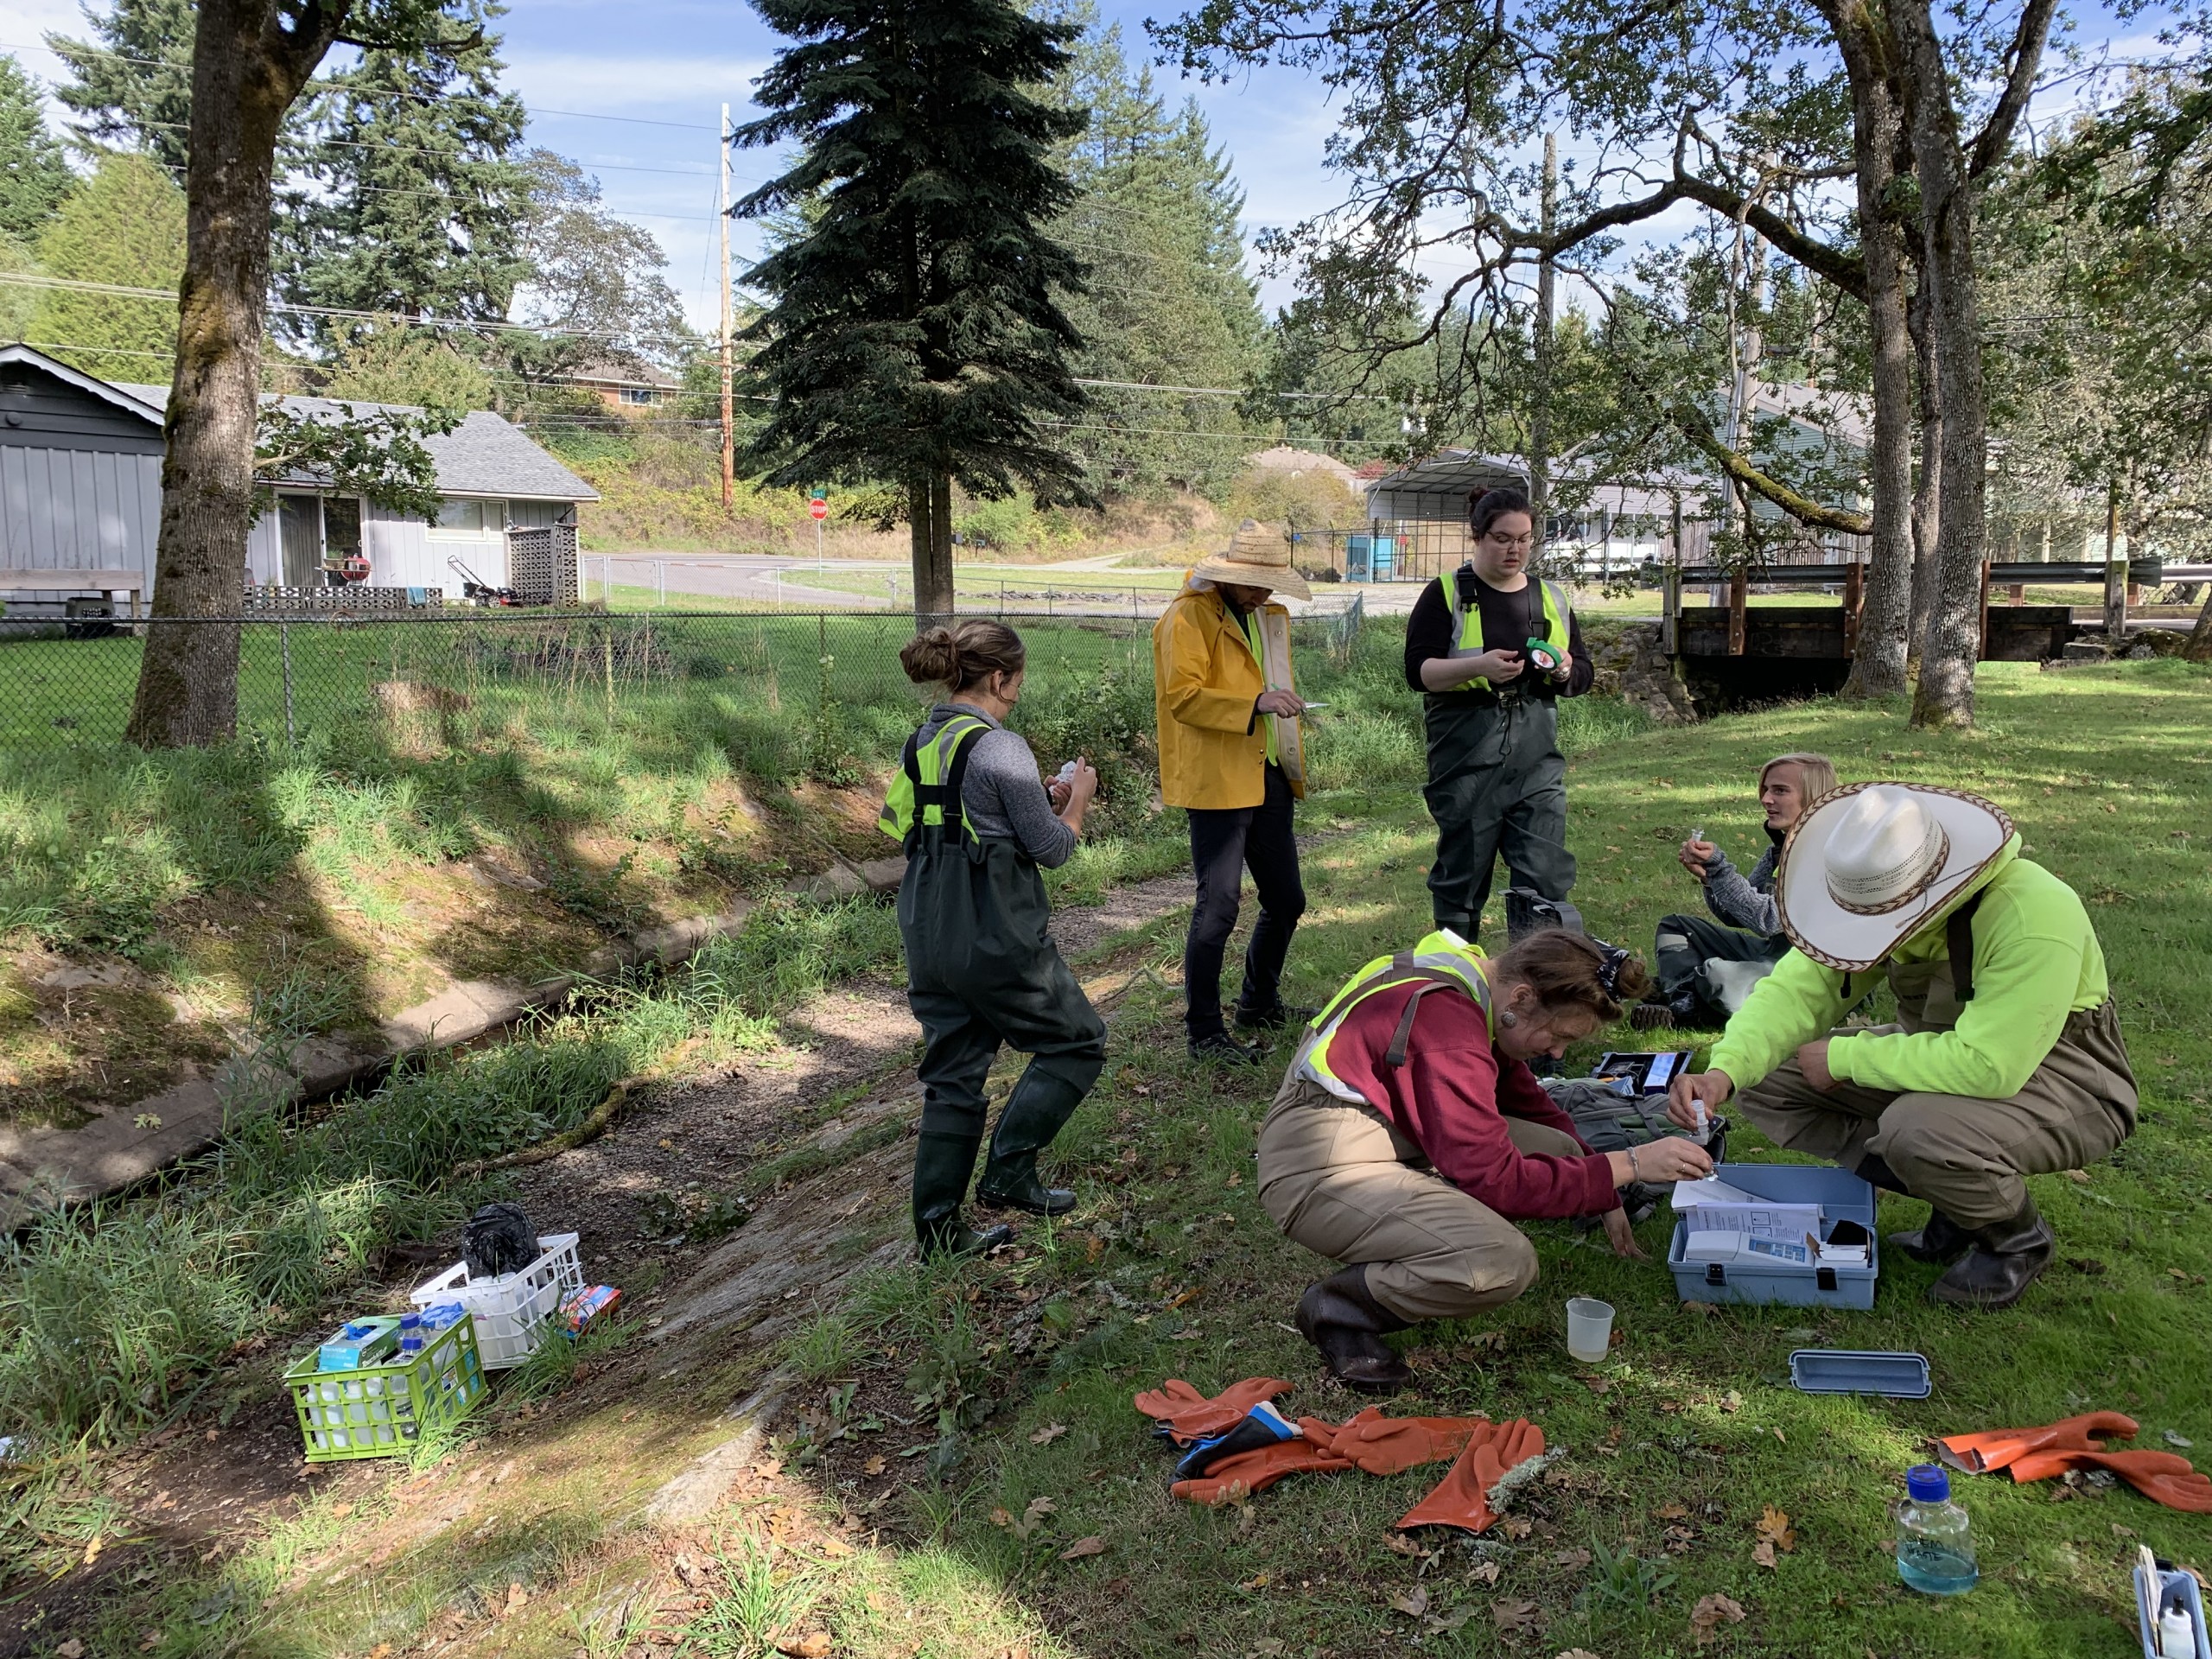 Photos of PLU students collecting samples near a stream bed.